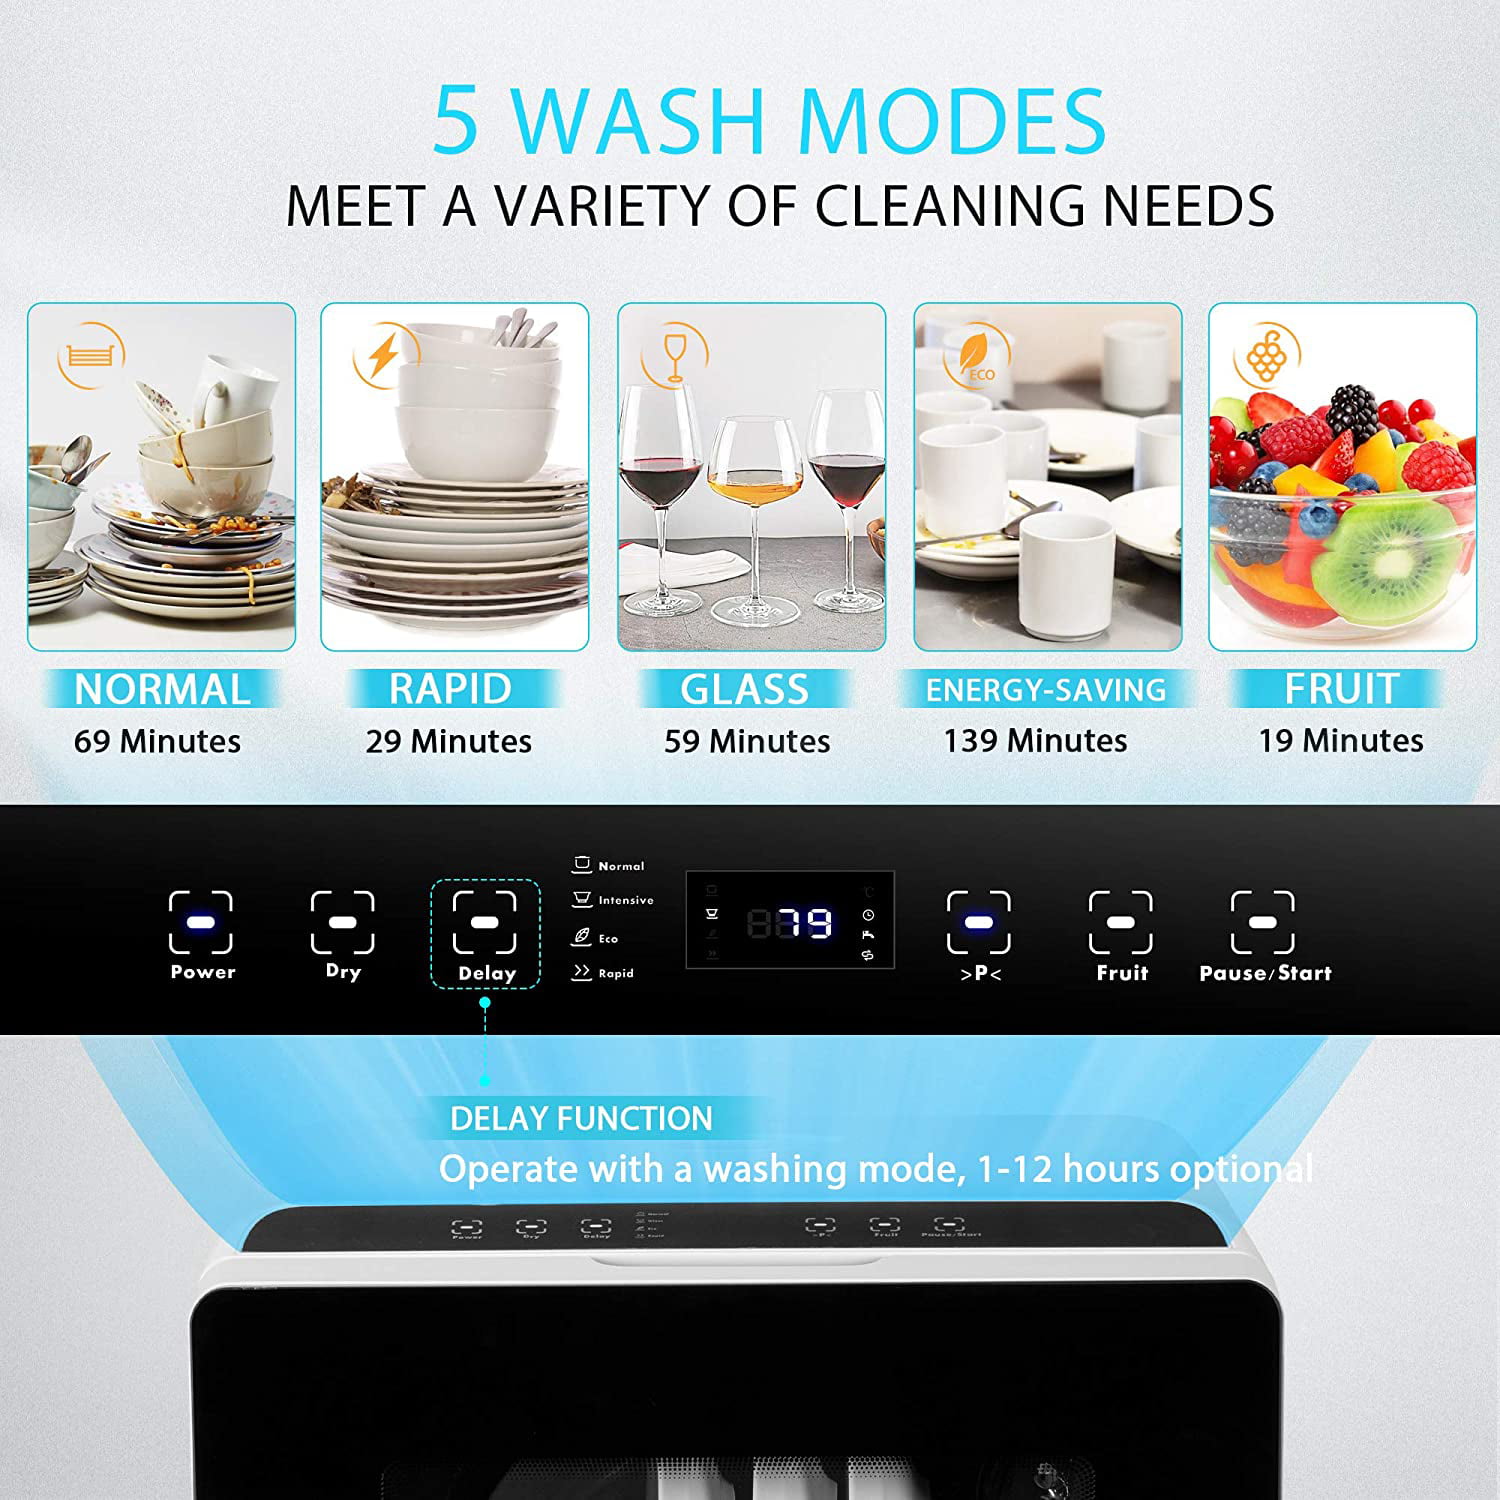 VIVOHOME 110V 840W Electric Portable Compact Countertop Small Dishwasher  Machine with 5L Built in Water Tank